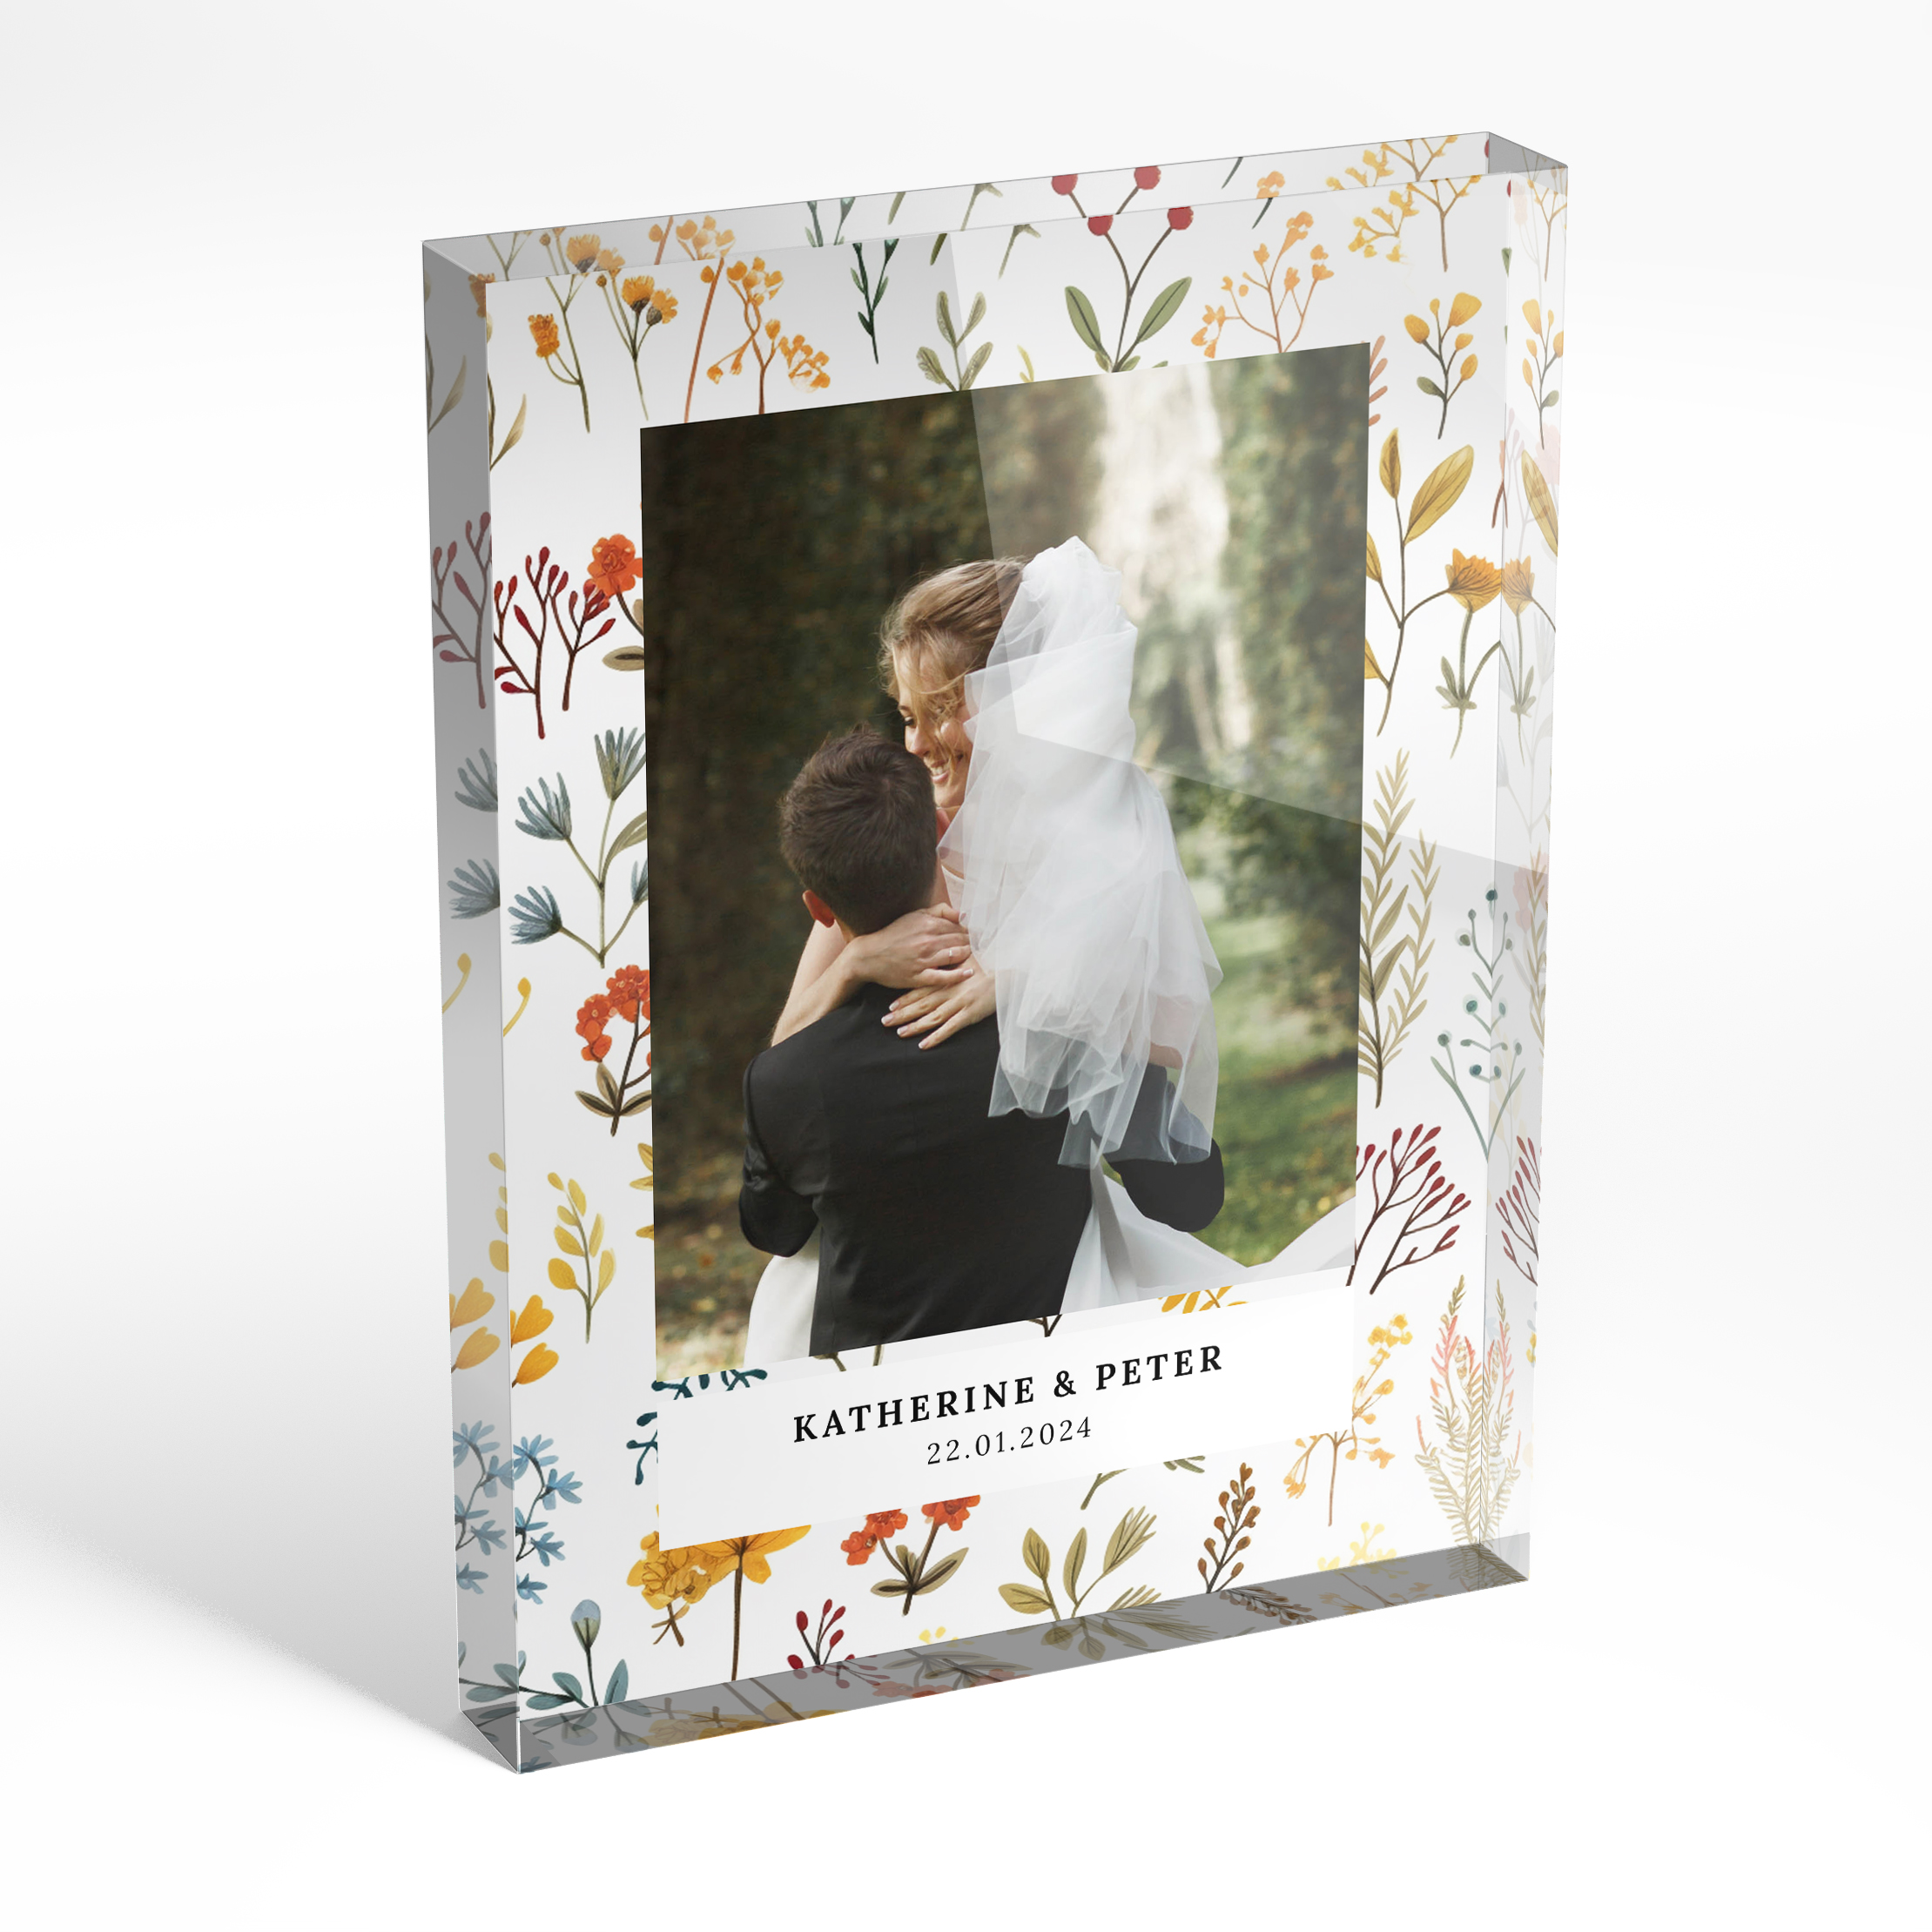 An angled side view of a portrait layout Acrylic Photo Gift with space for 1 photo. Thiis design is named "Floral Wedding Waltz". 